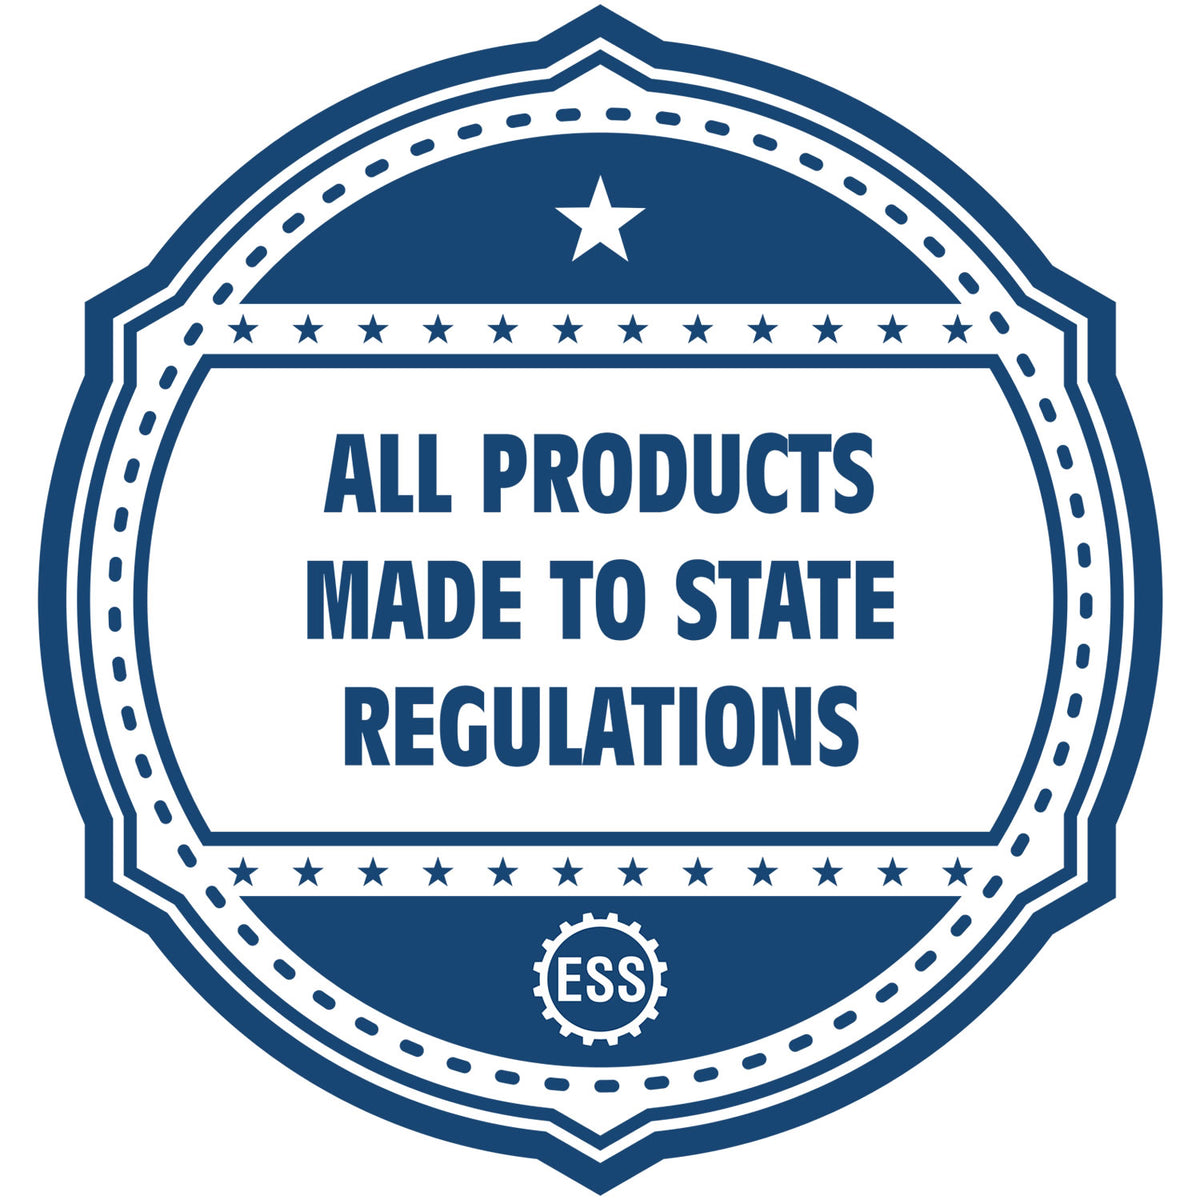 A blue icon or badge for the Hybrid Rhode Island Architect Seal showing that this product is made in compliance with state regulations.